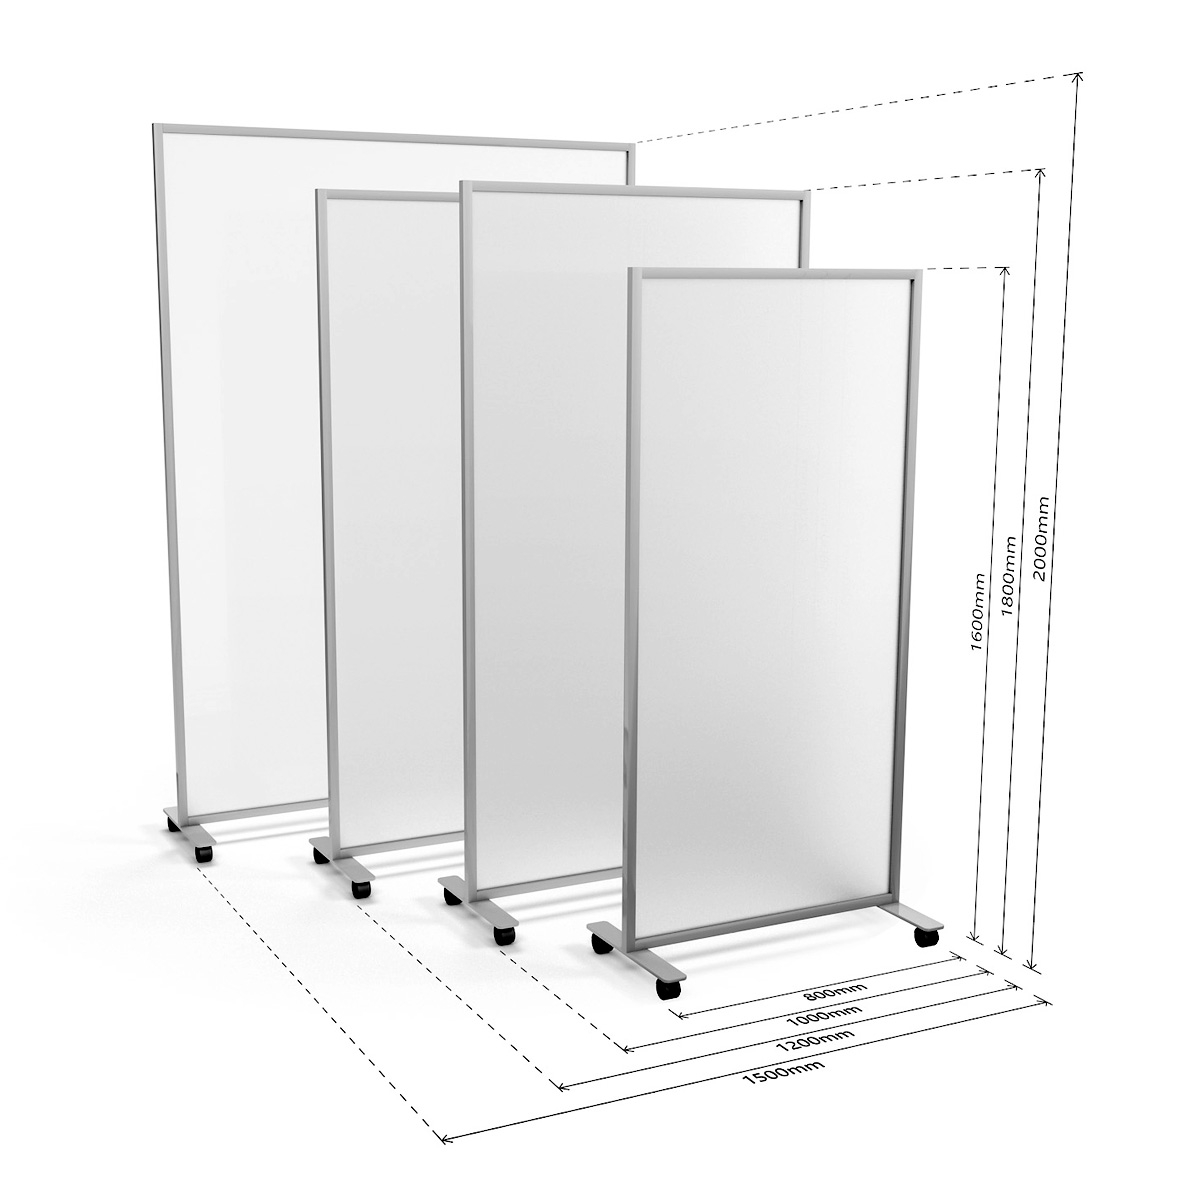 Dimensions of ACHOO® Frosted Perspex® Office Divider on Wheels